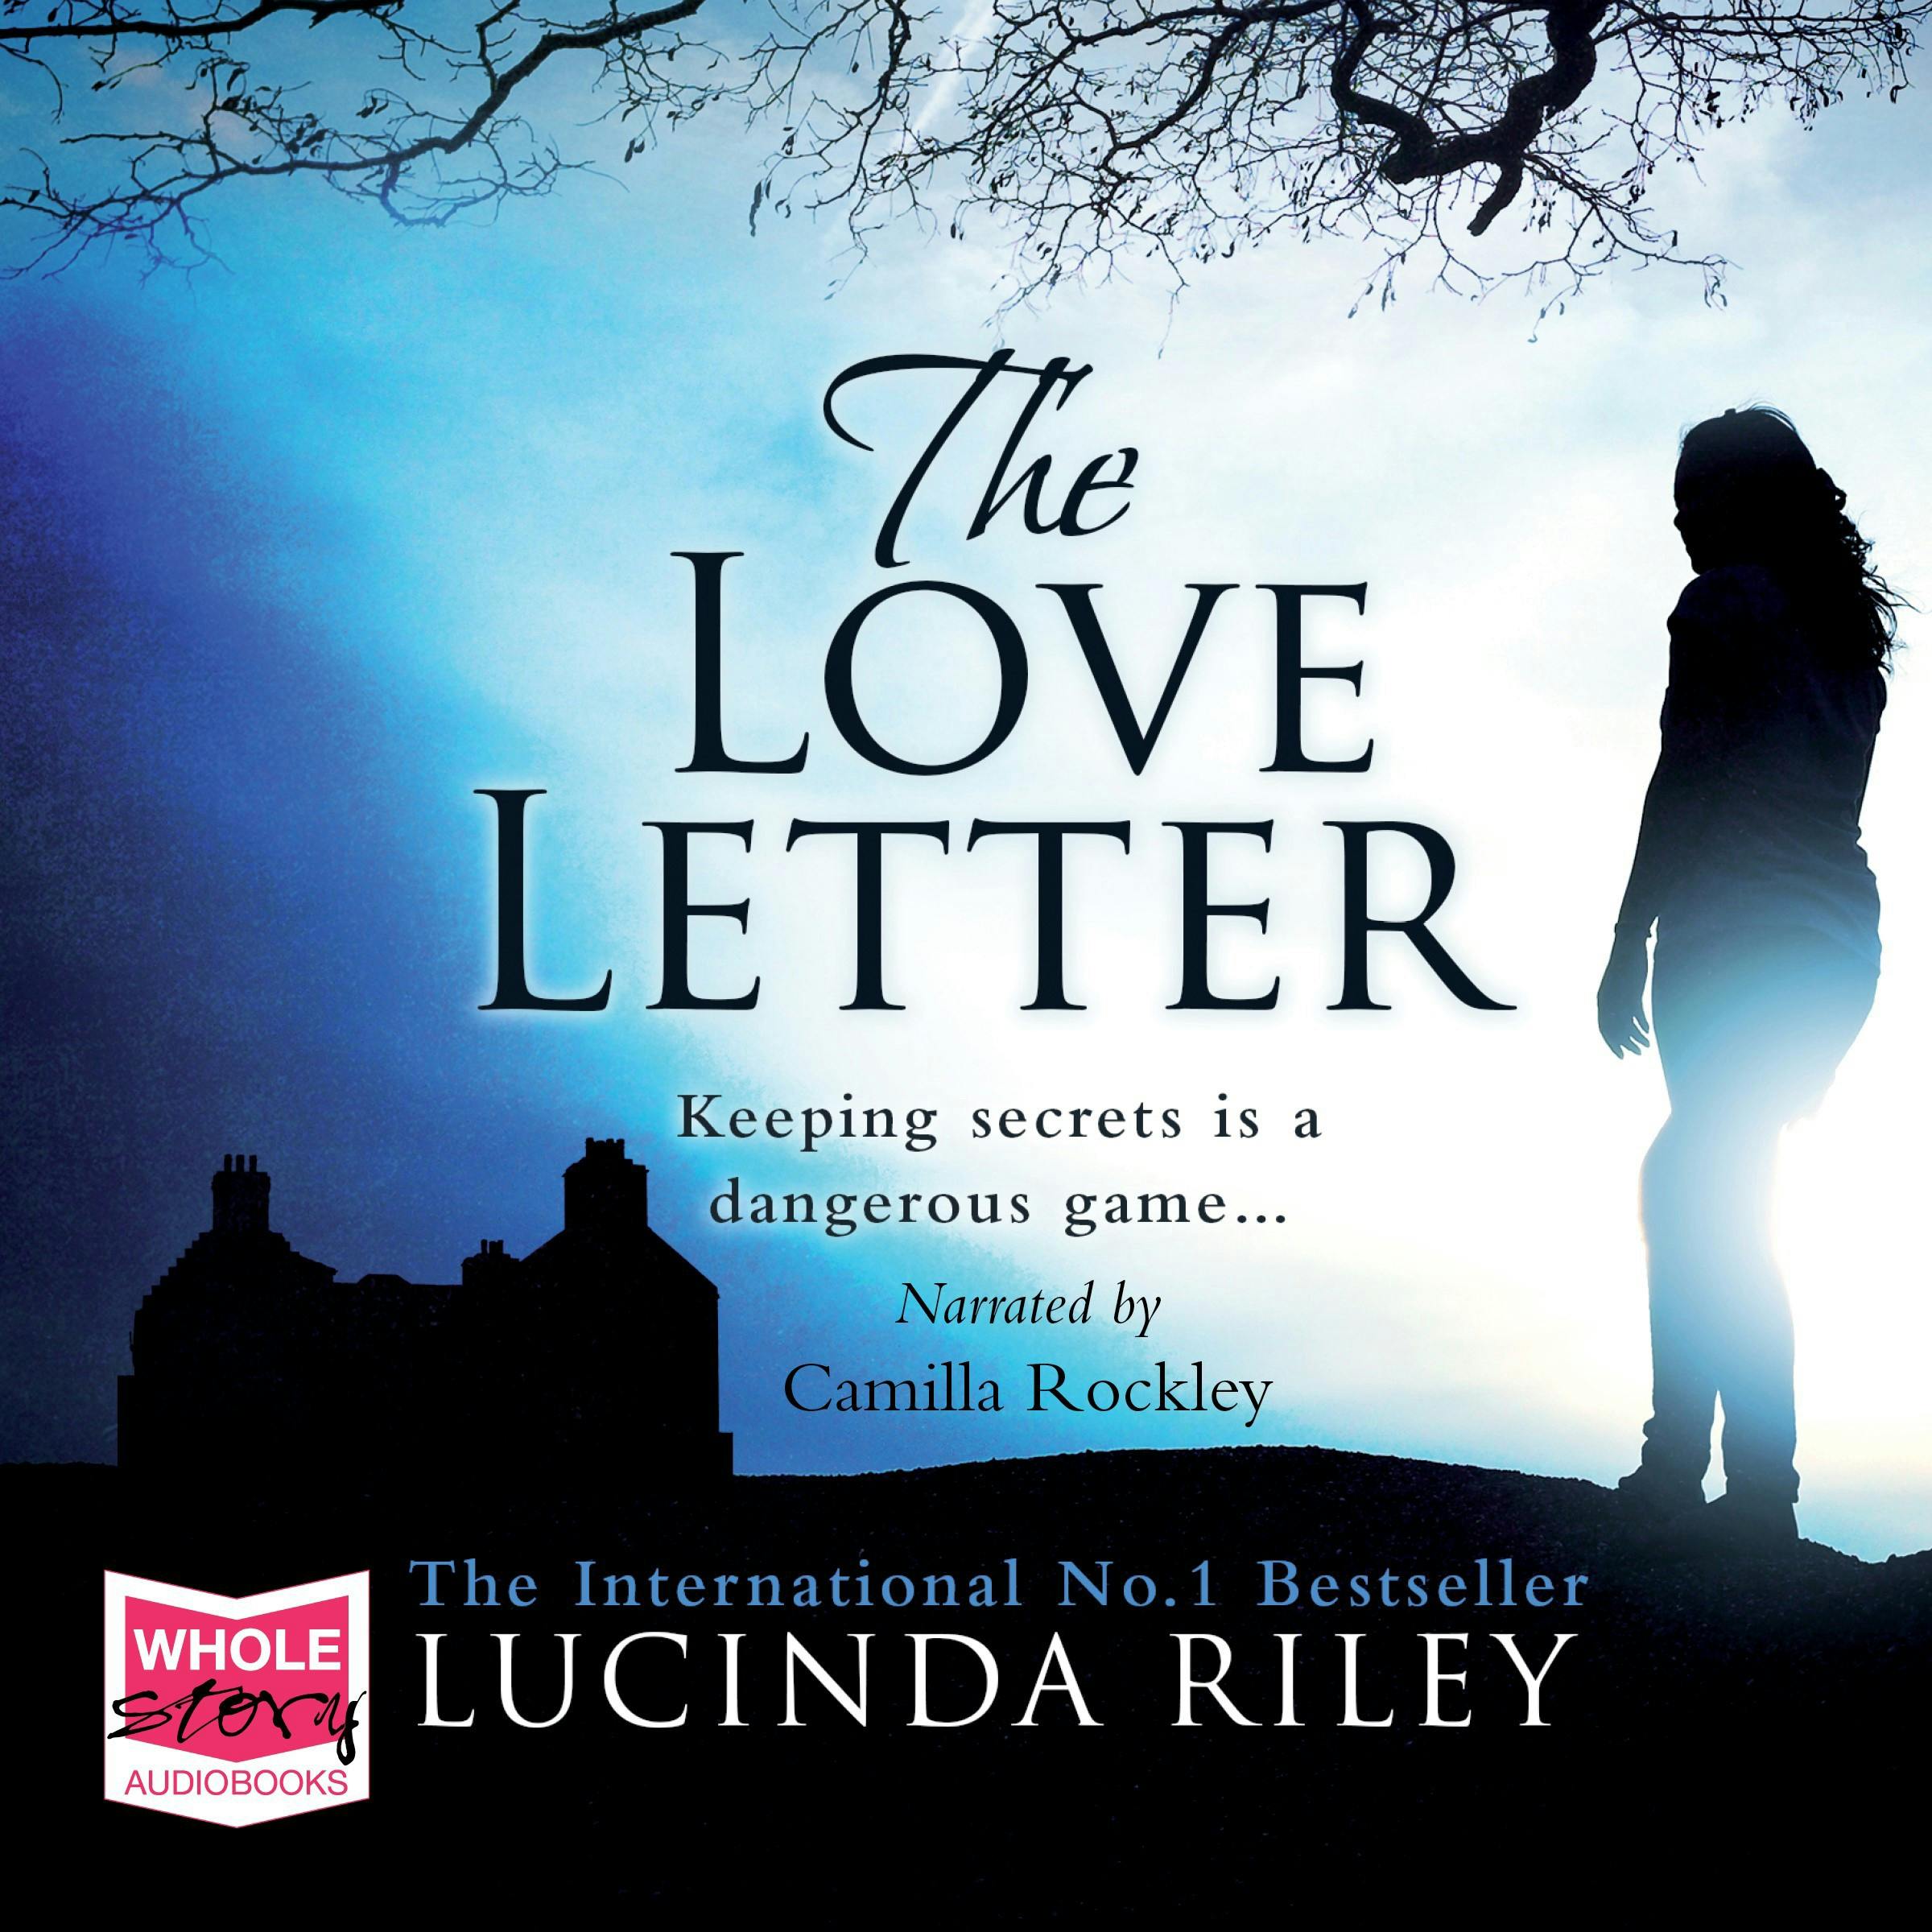 The Love Letter - undefined